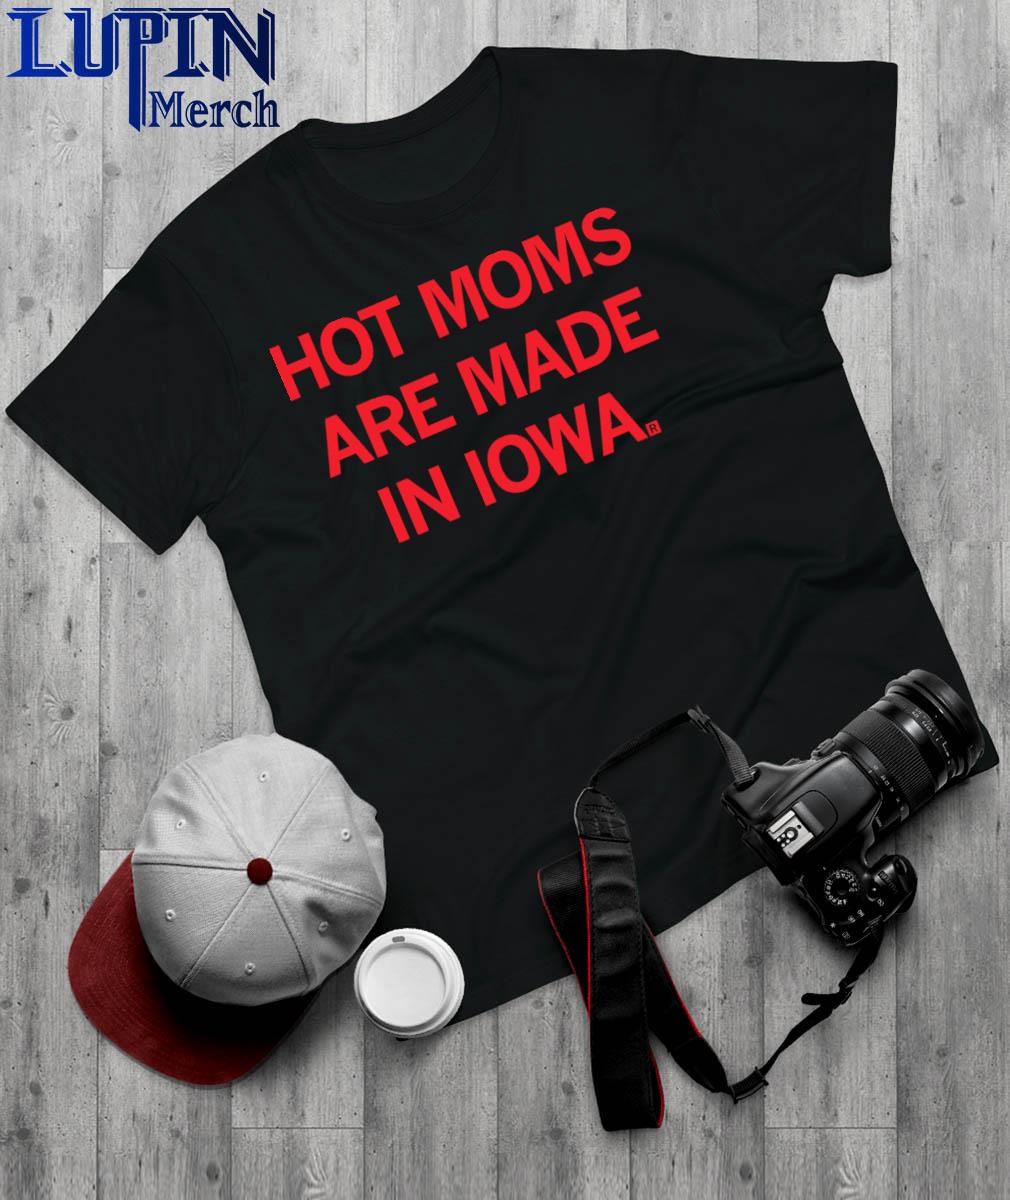 Official Hot Moms Are Made In Iowa Raygun Shirt